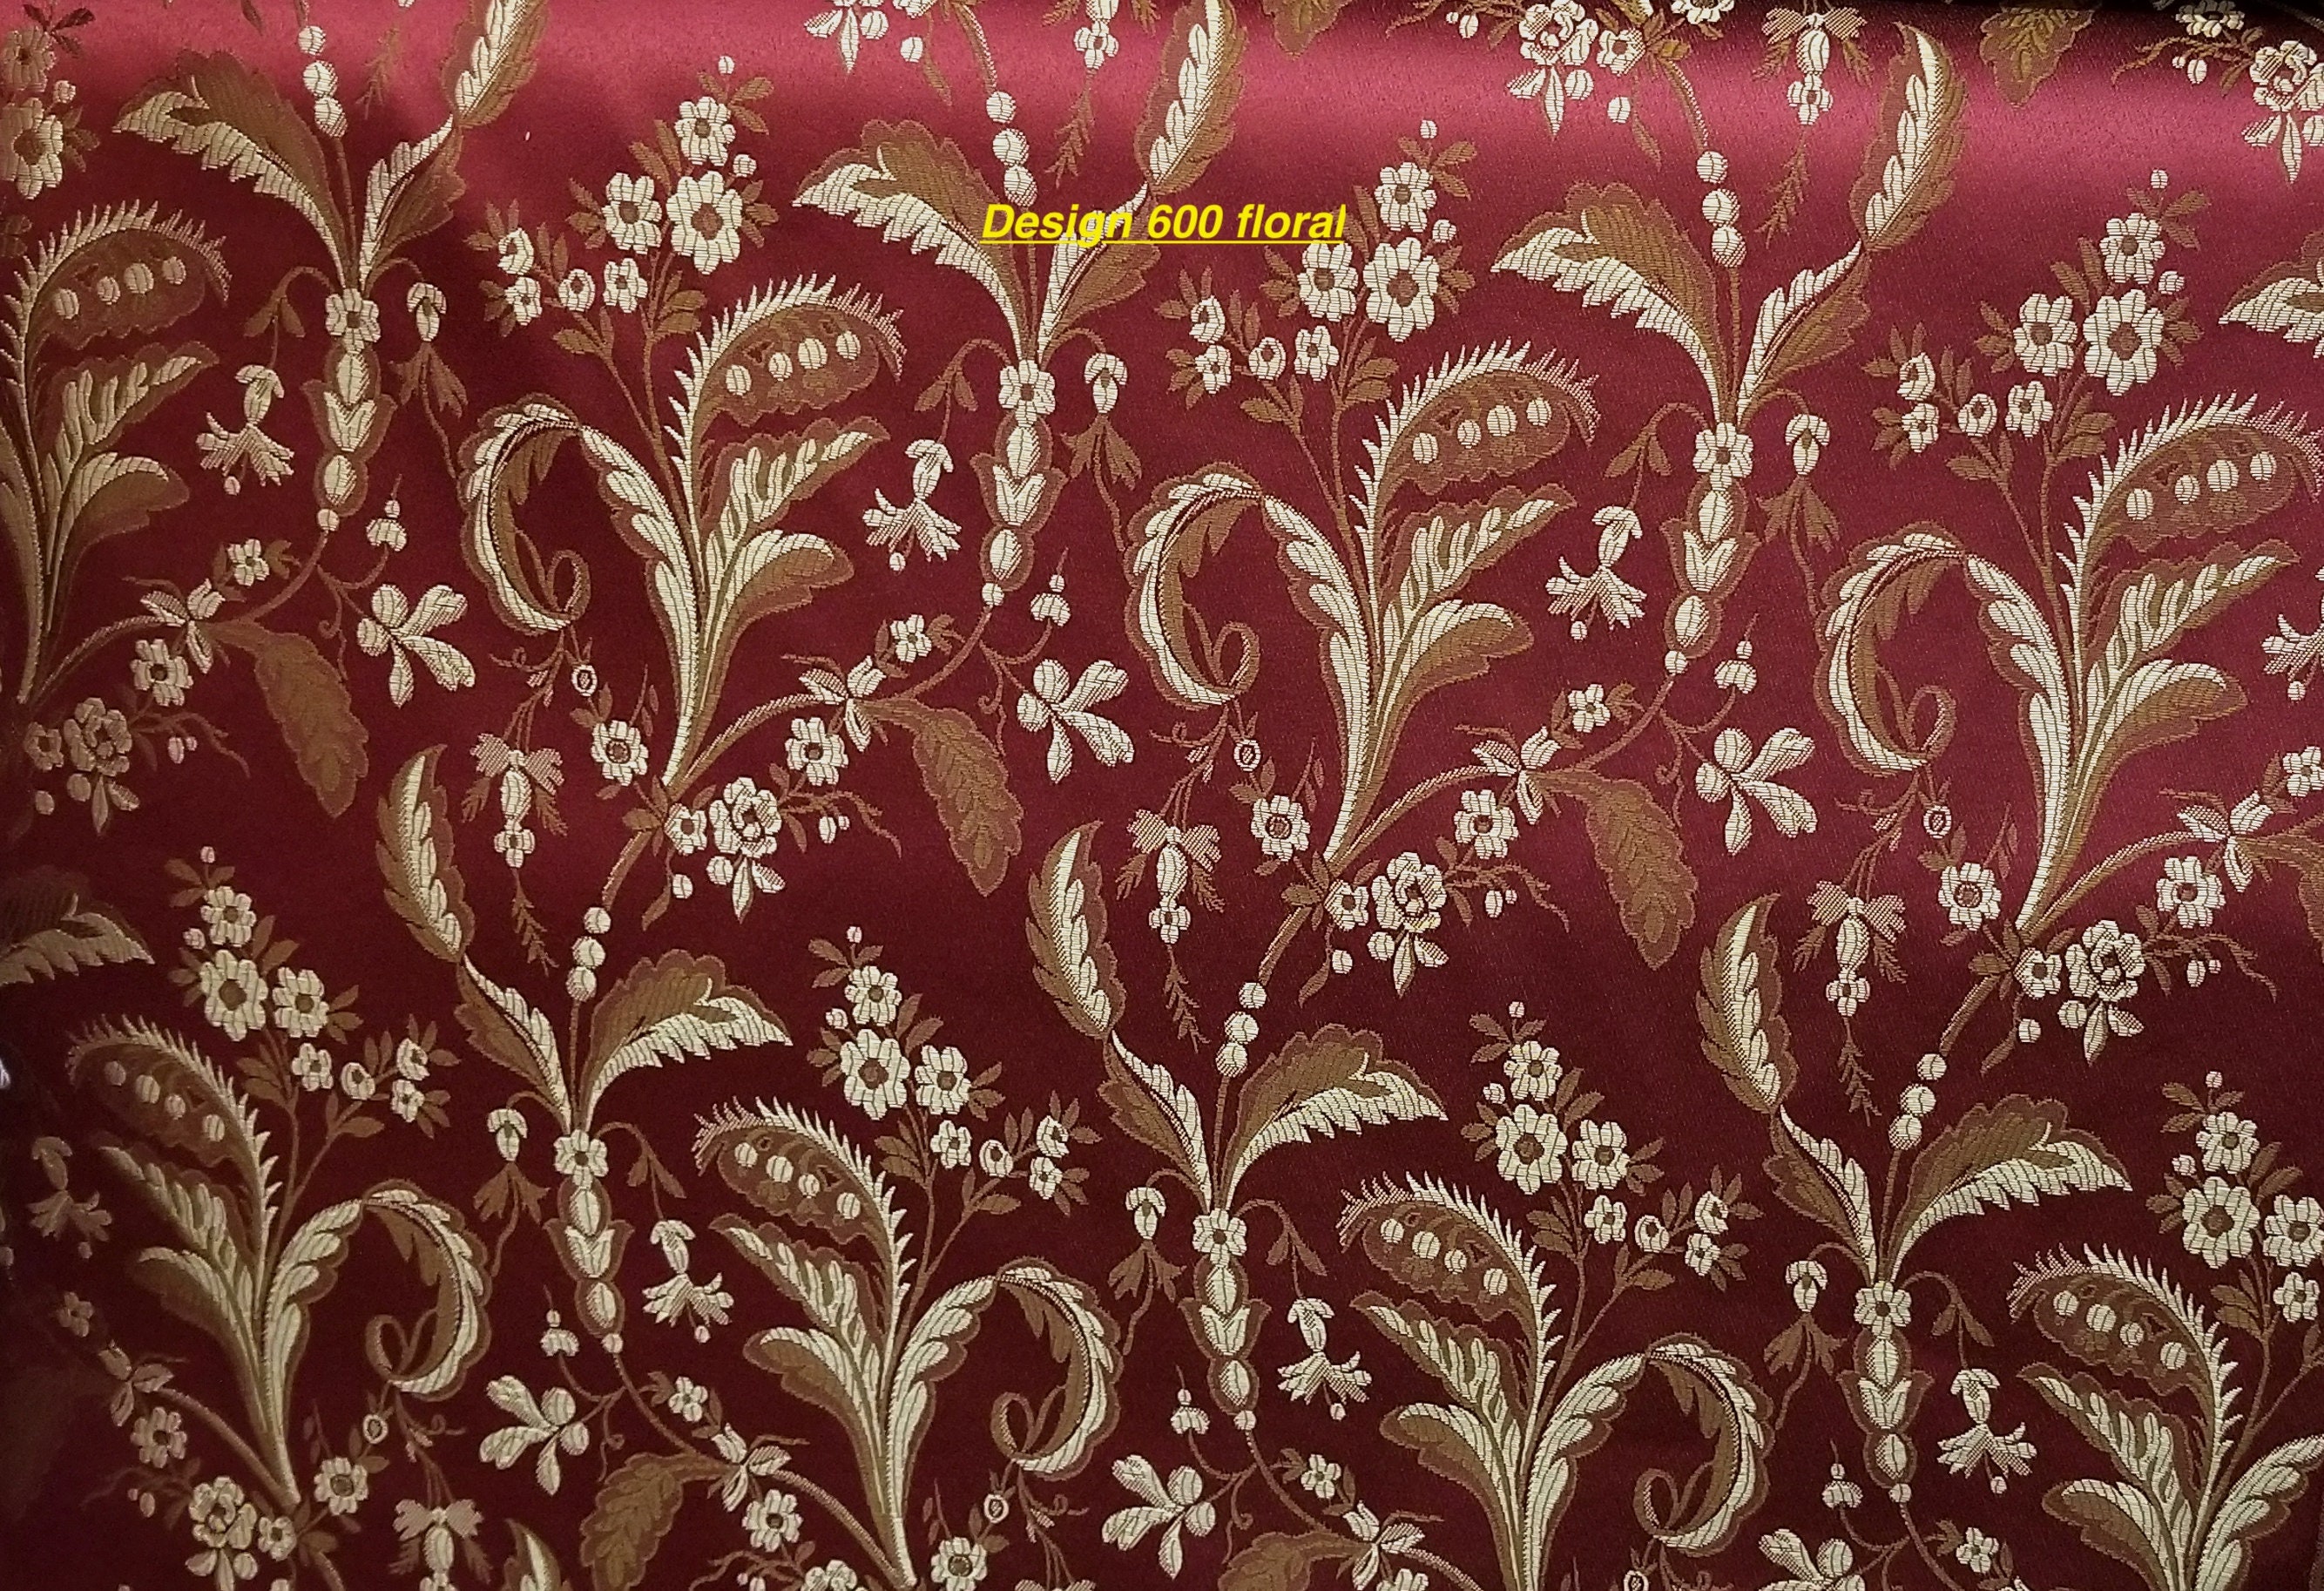 Jacquard Fabric Color Burgundy/gold, Upholstery and Drapery